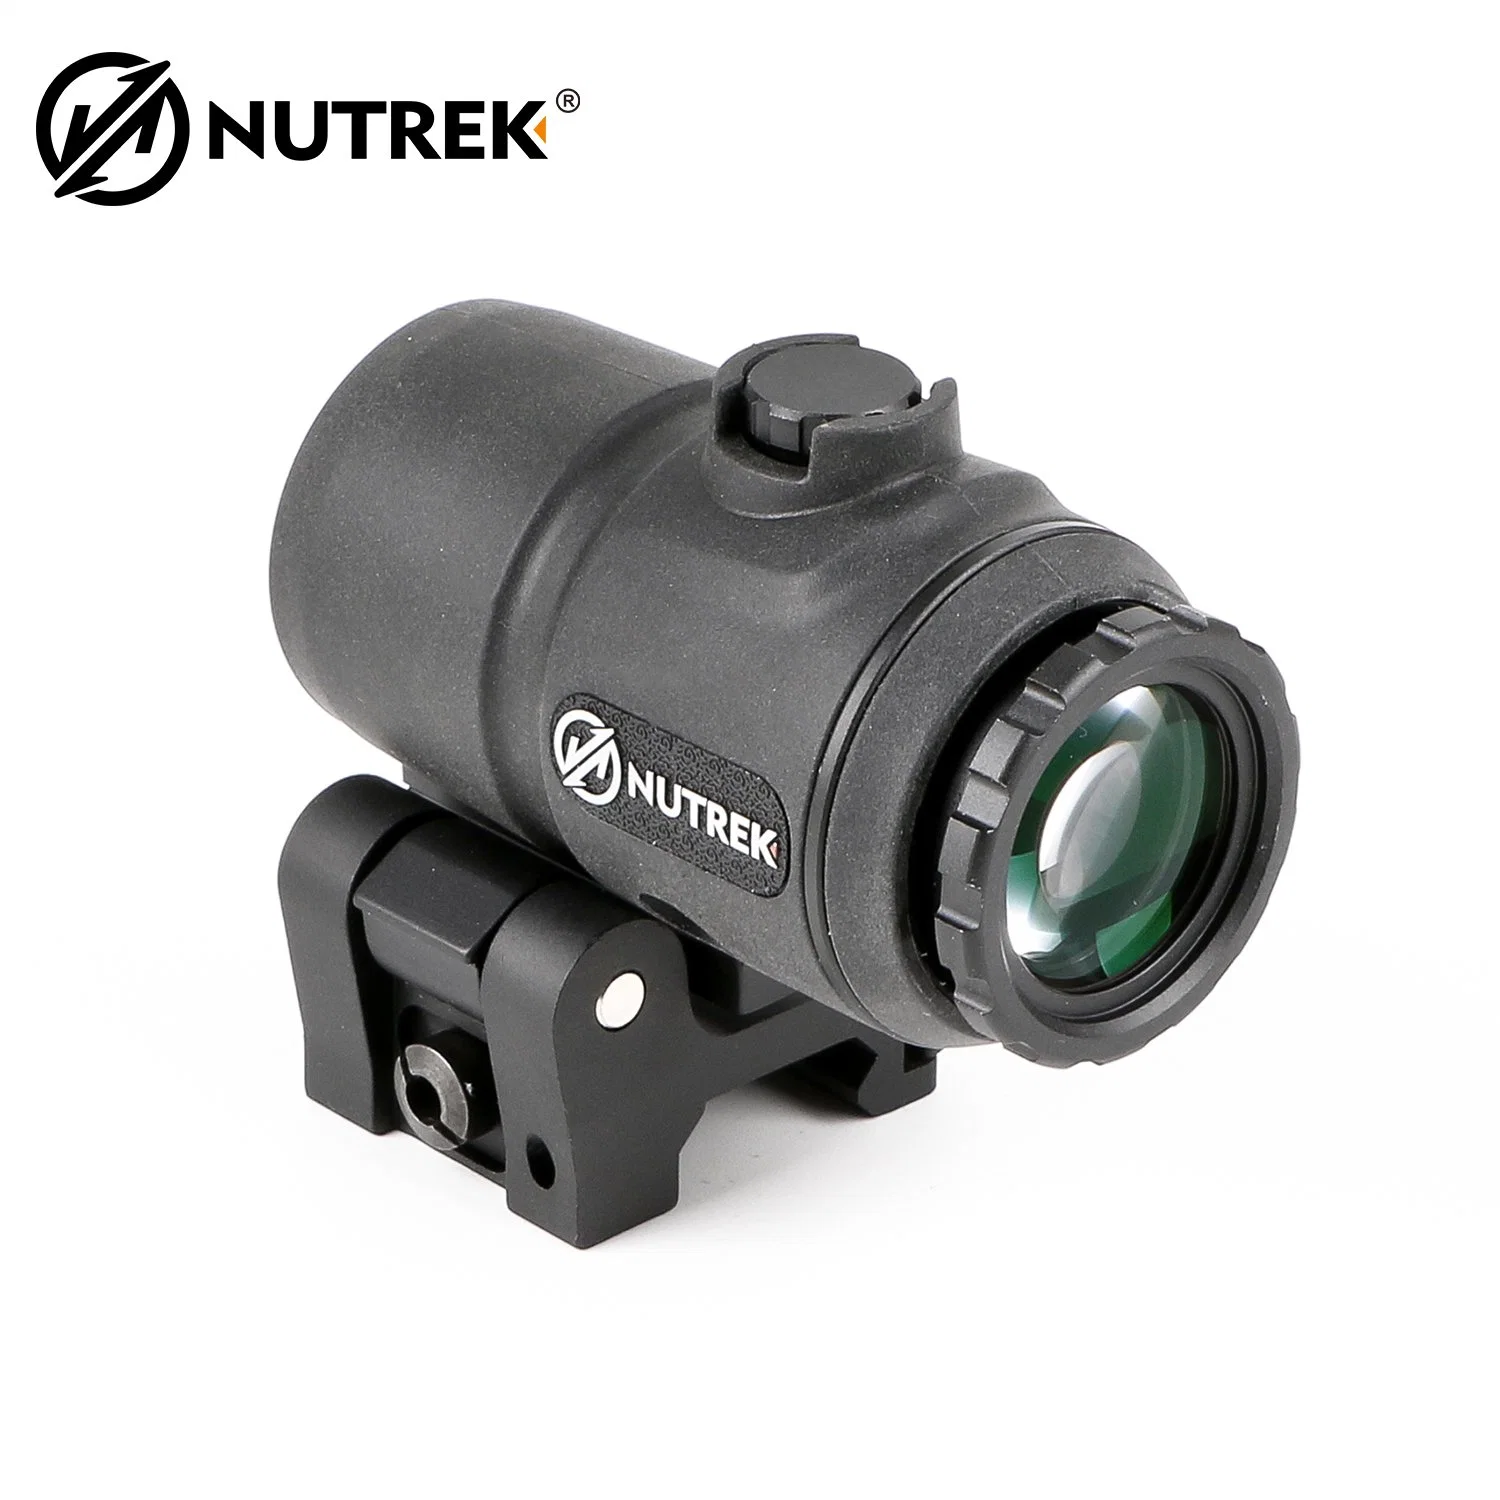 Nutrek Optics Compact Riflescope Red DOT Sight 3X Magnifier Prism Scope with Qd Base